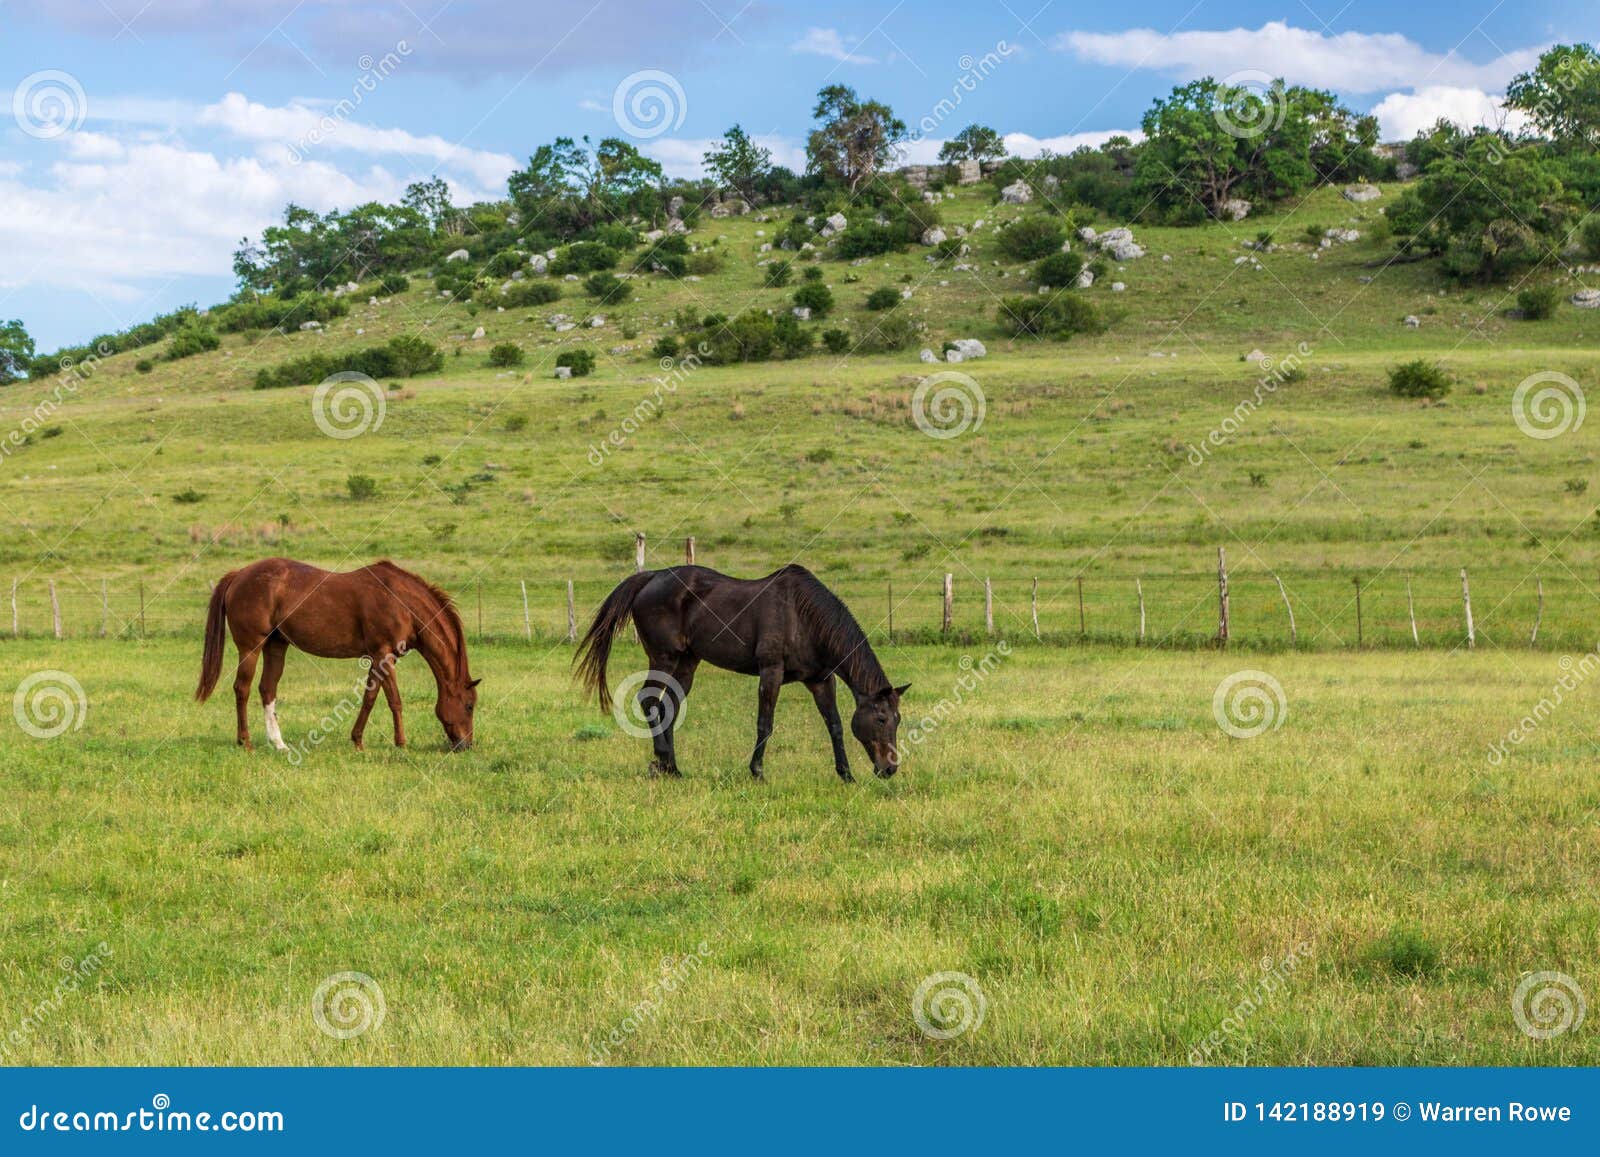 retired racehorses in wide open spaces